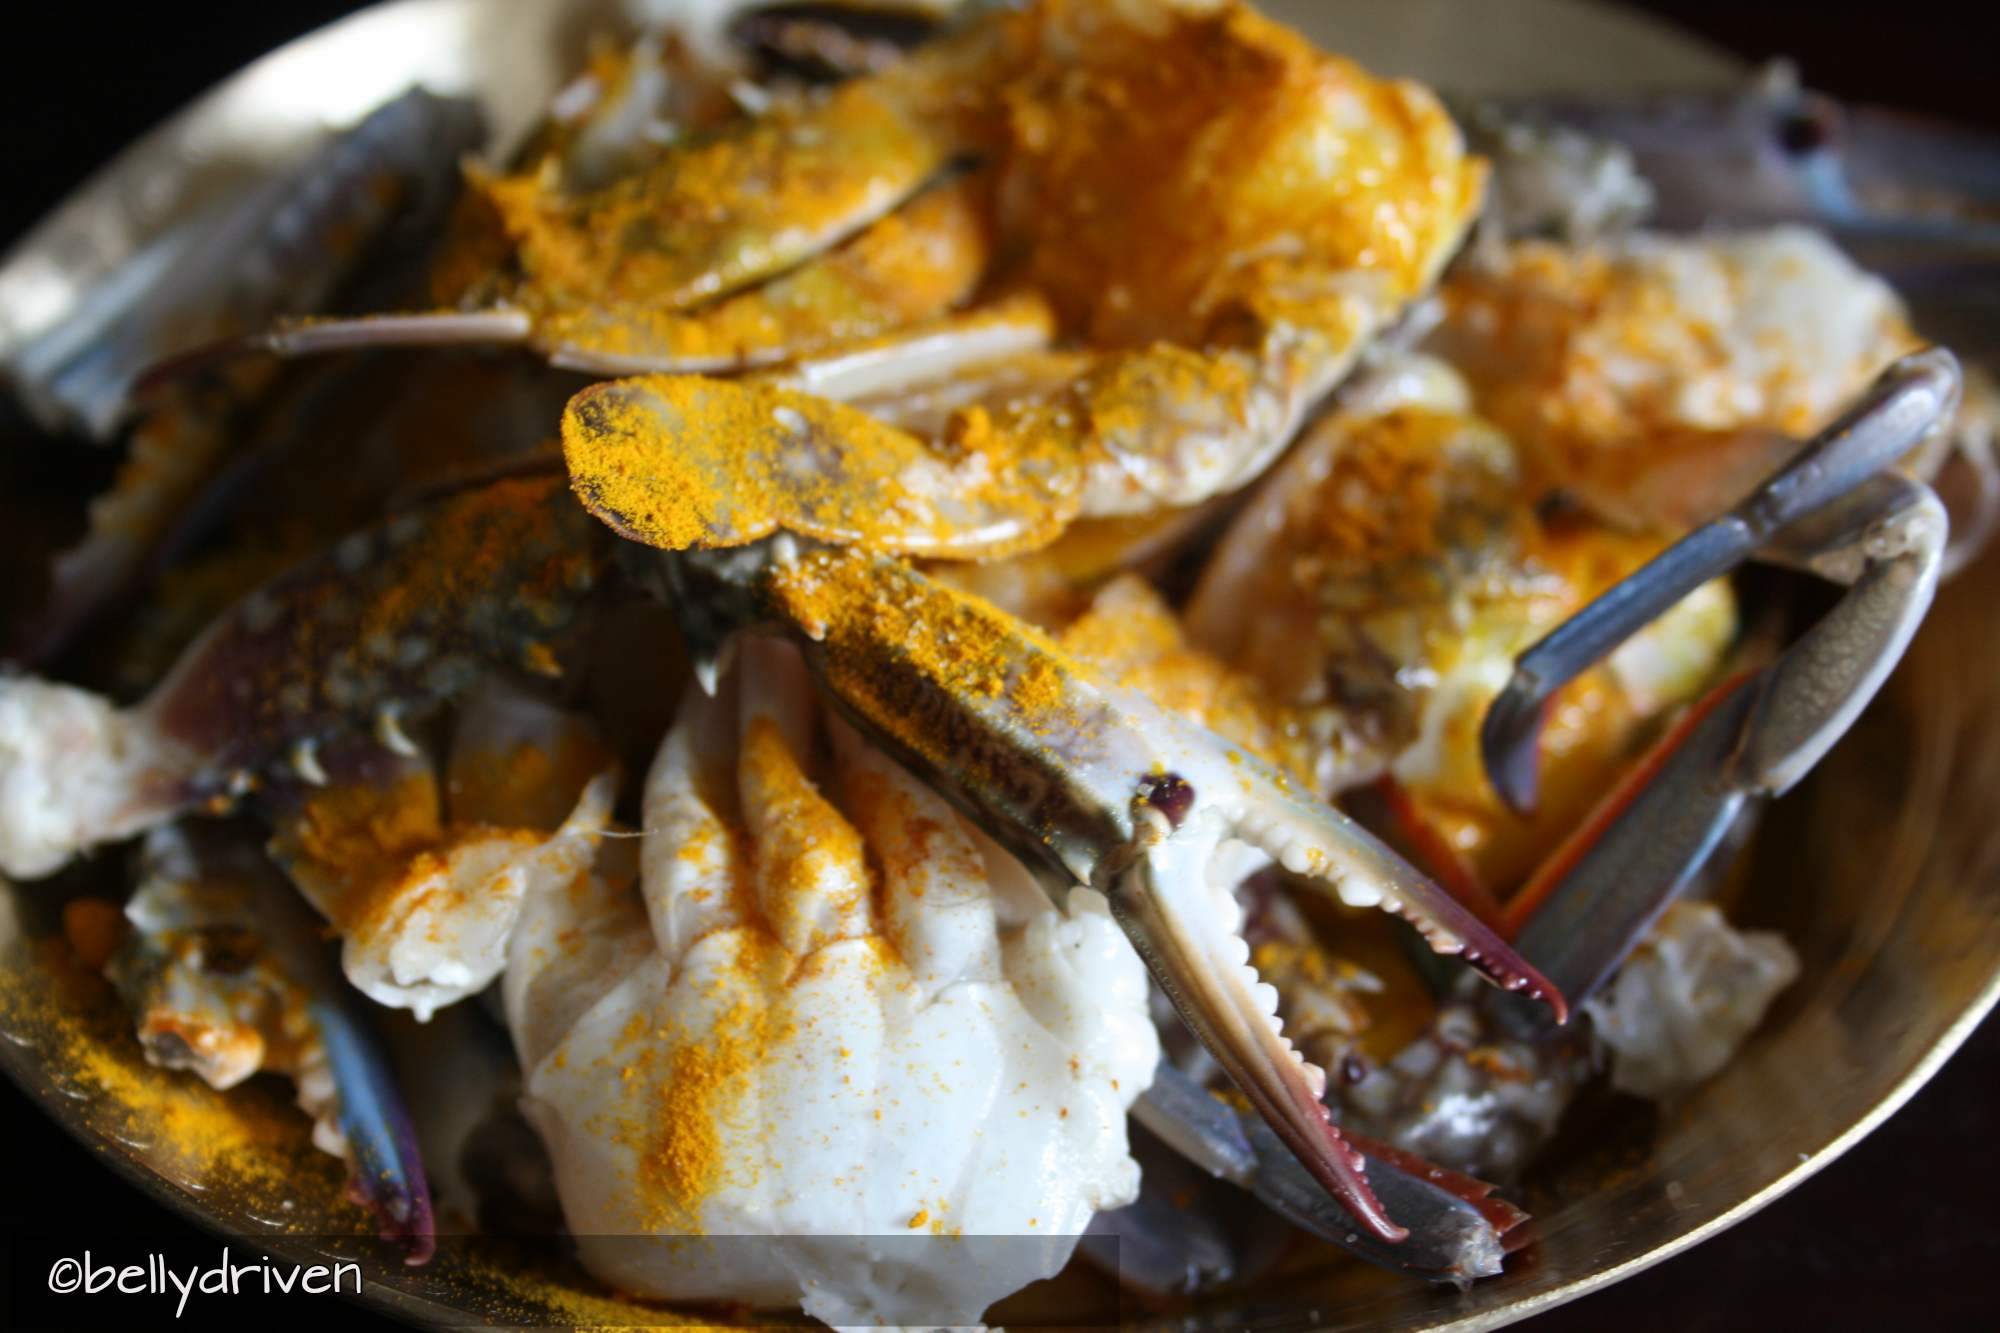 Marinated crabs_bellydriven